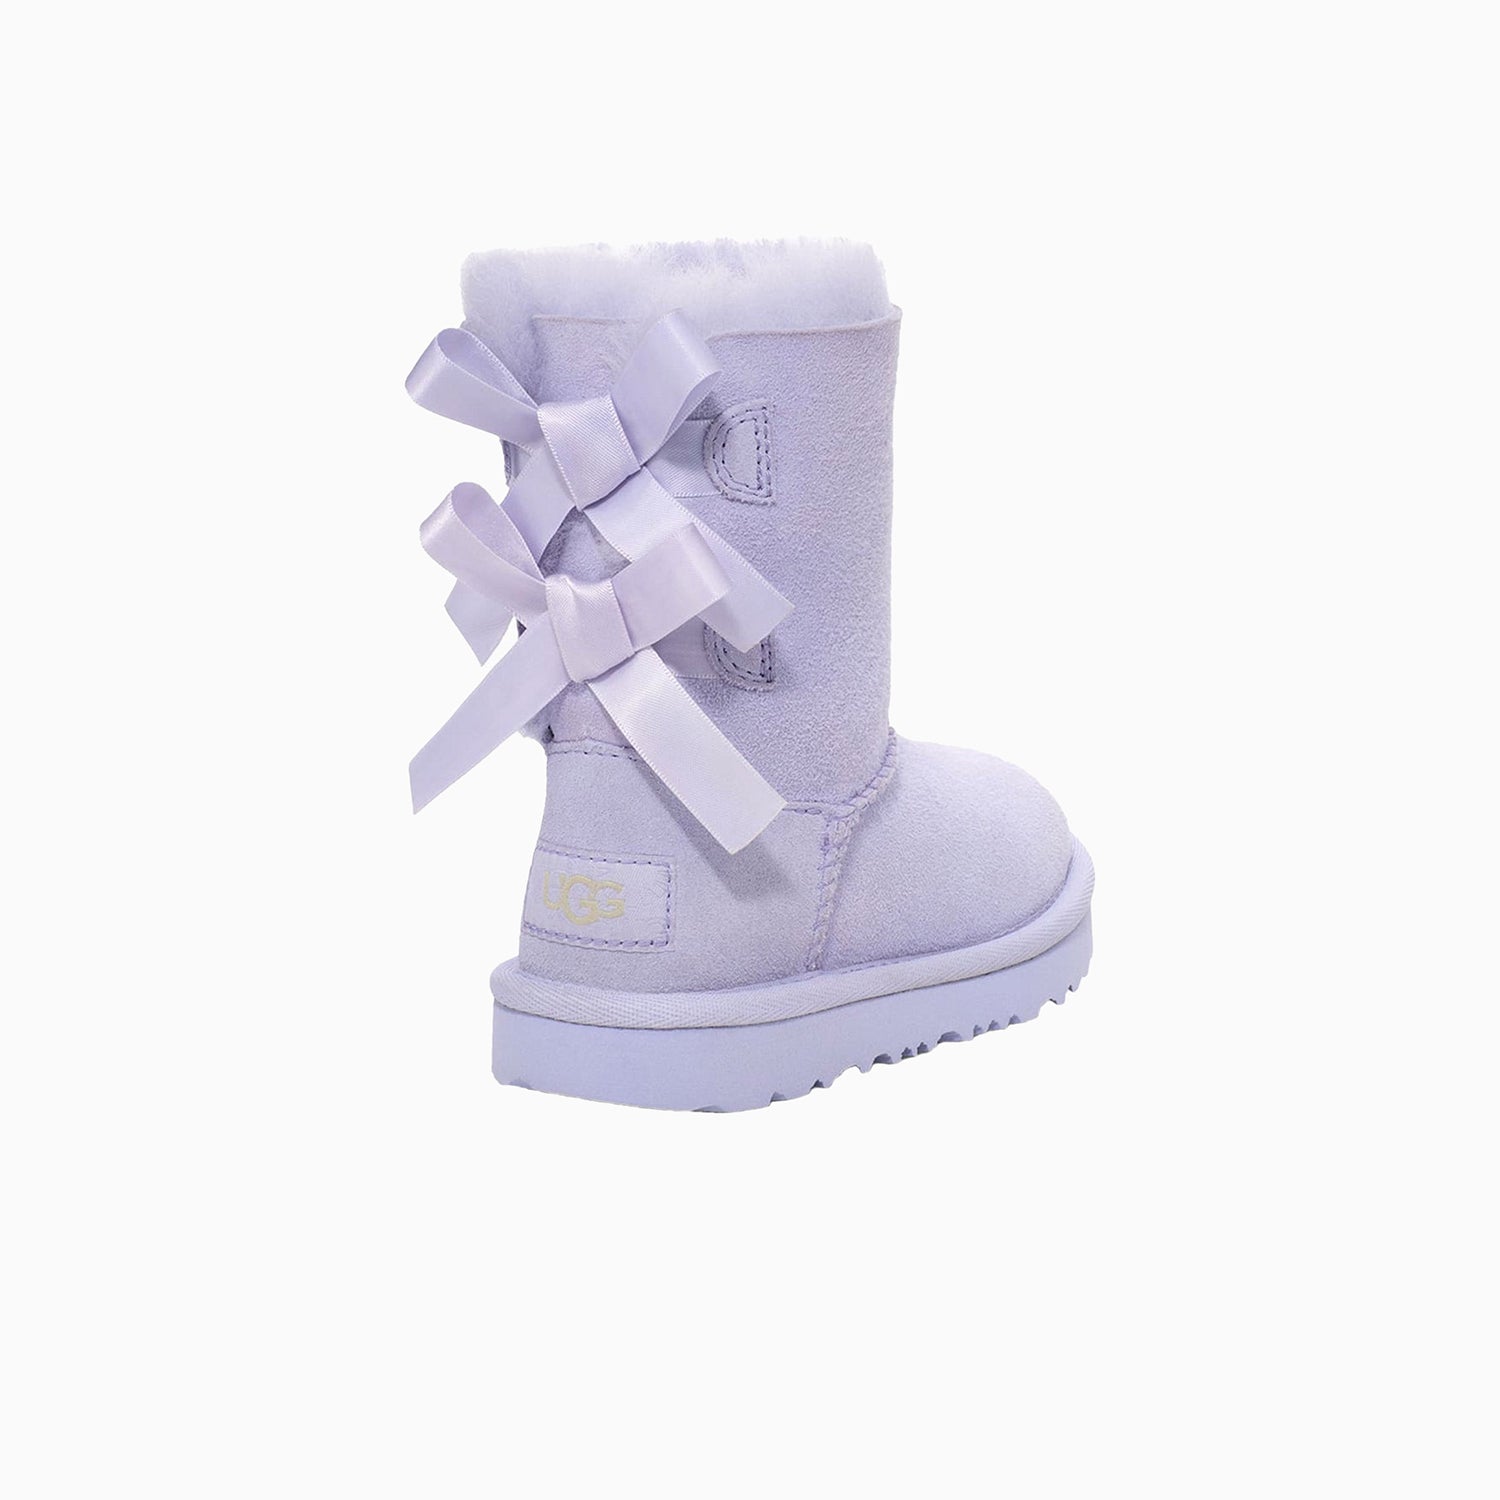 ugg-kids-bailey-bow-ii-toddlers-boot-1017394t-sbls